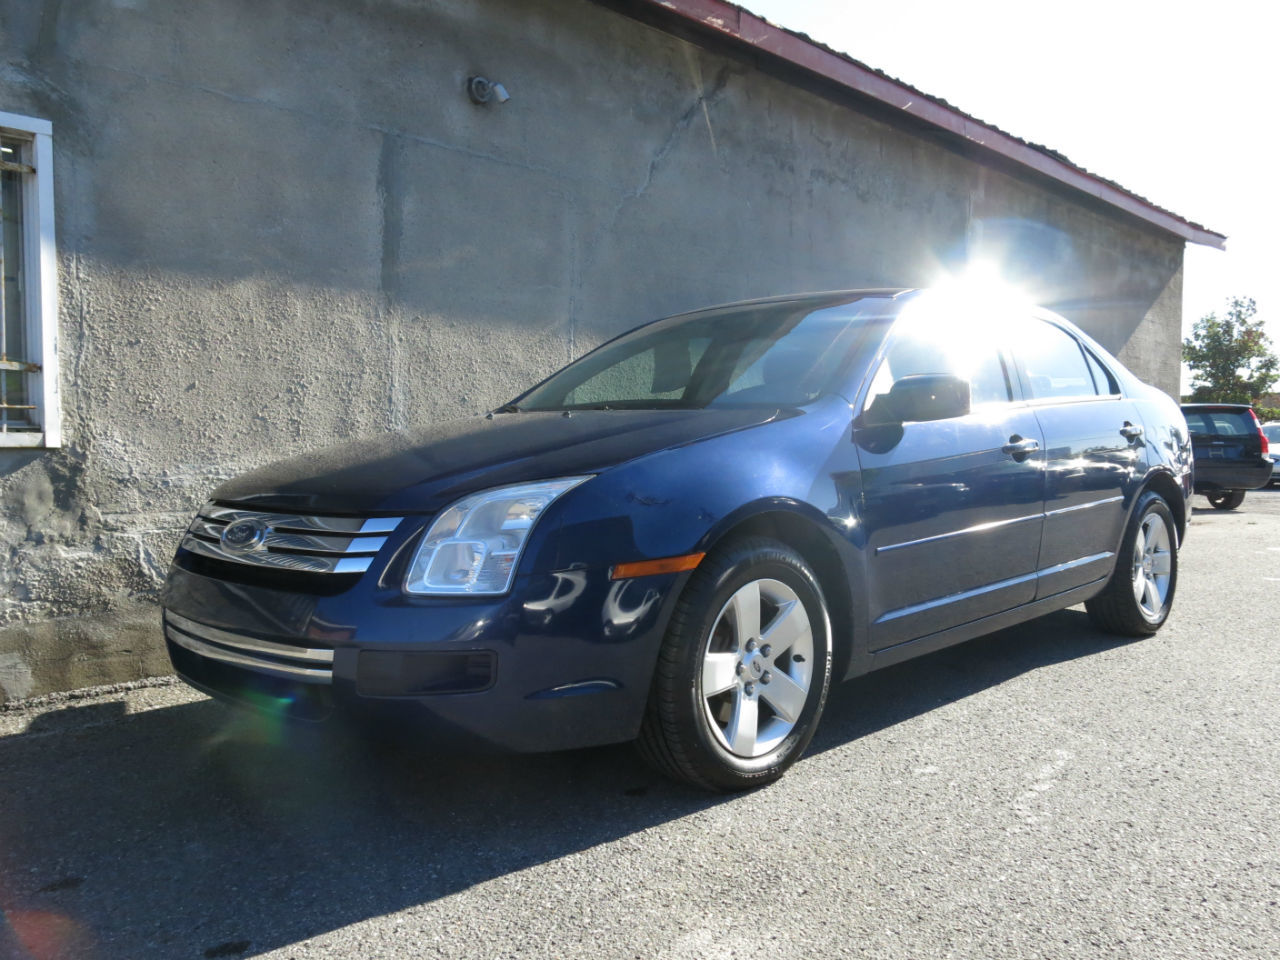 Used 2006 ford fusion engine